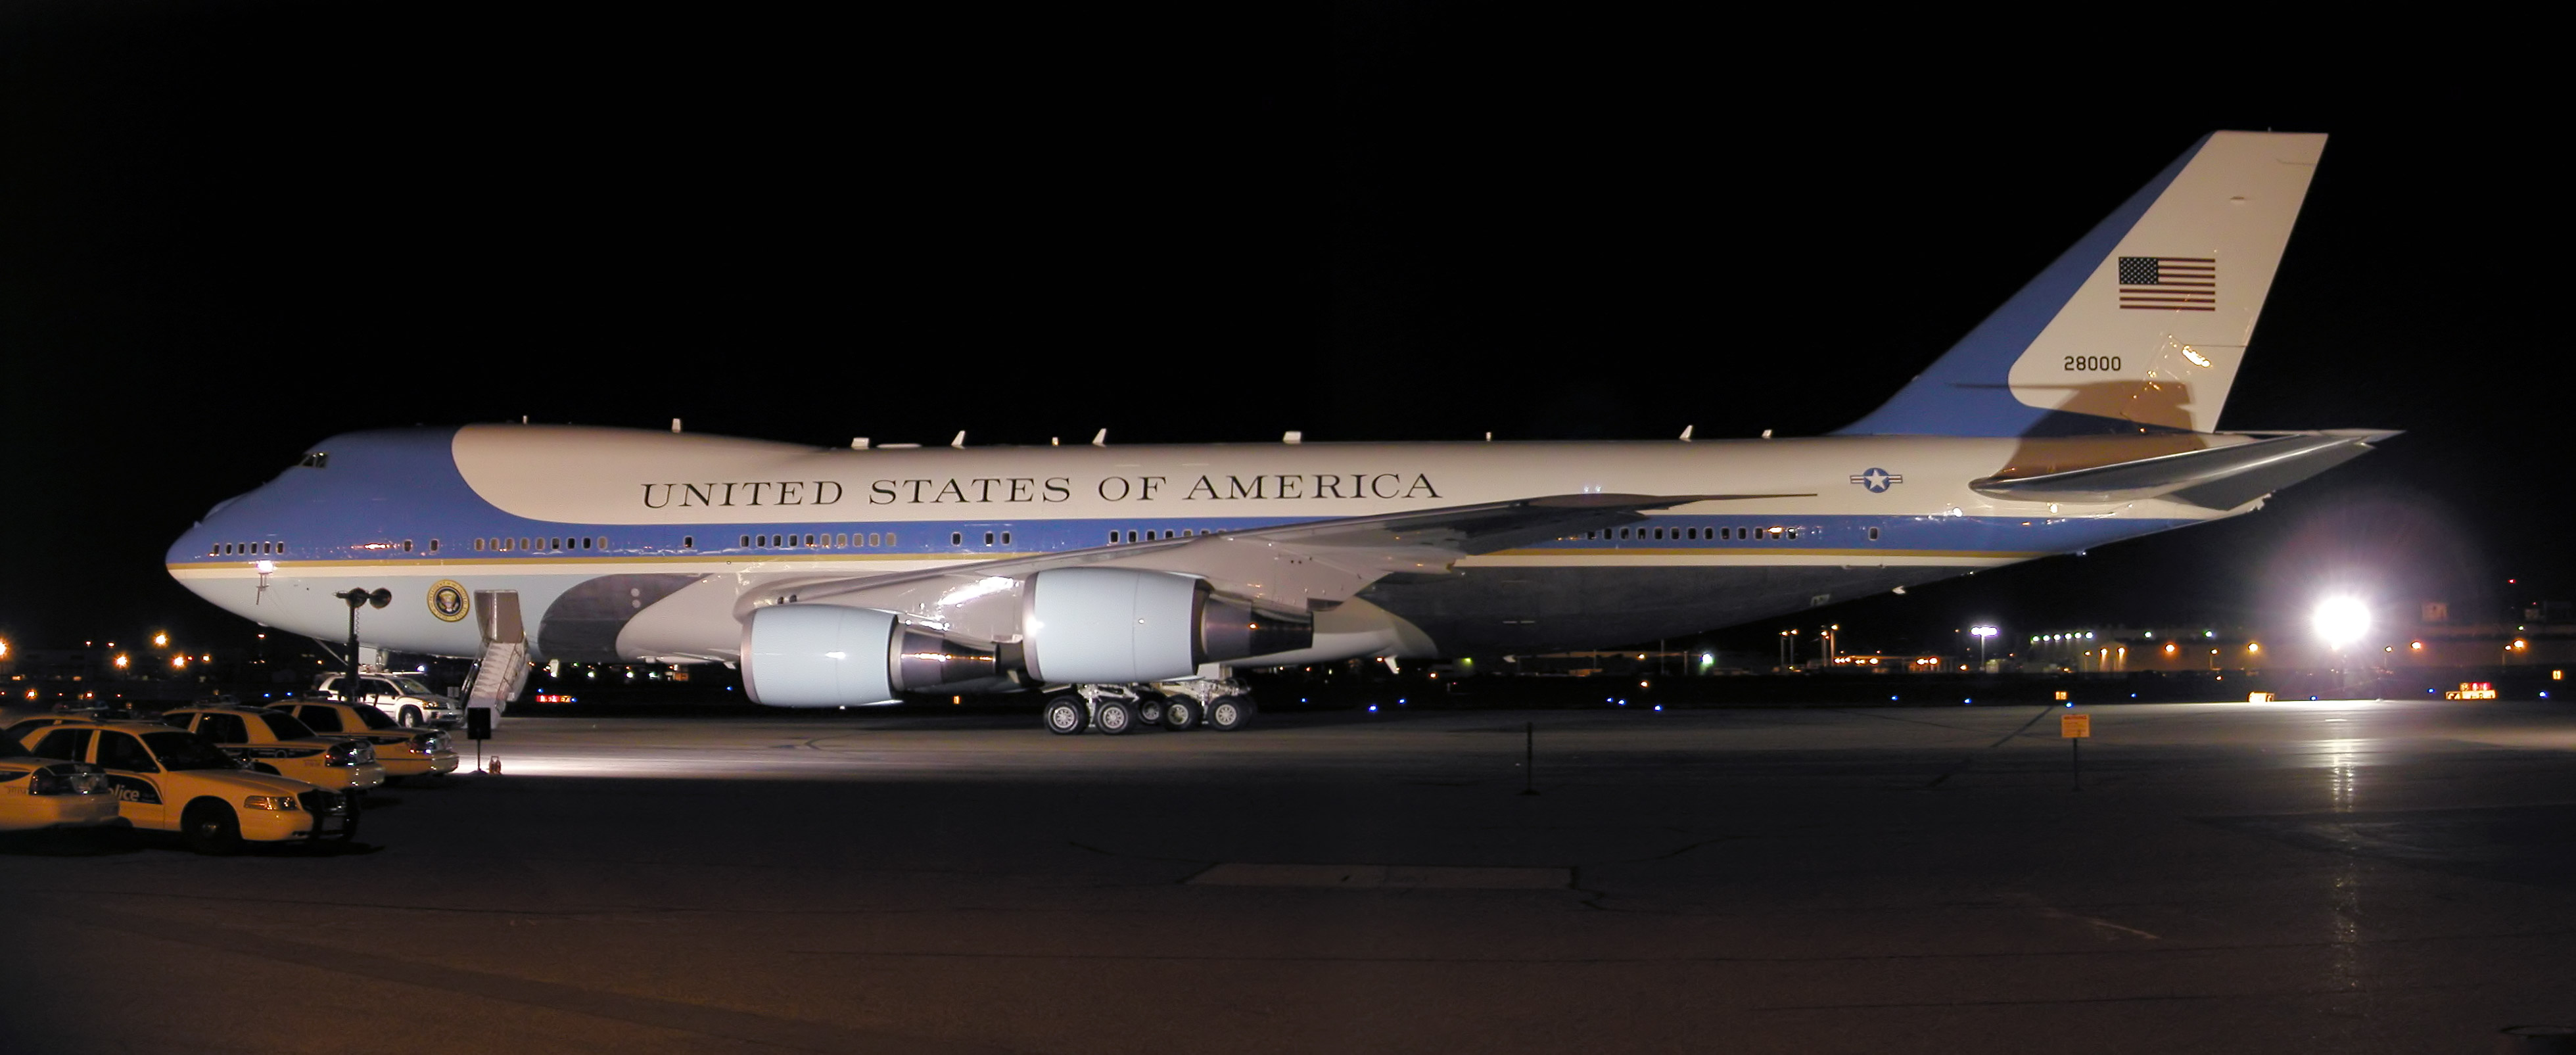 Air Force One by freezejeans on DeviantArt